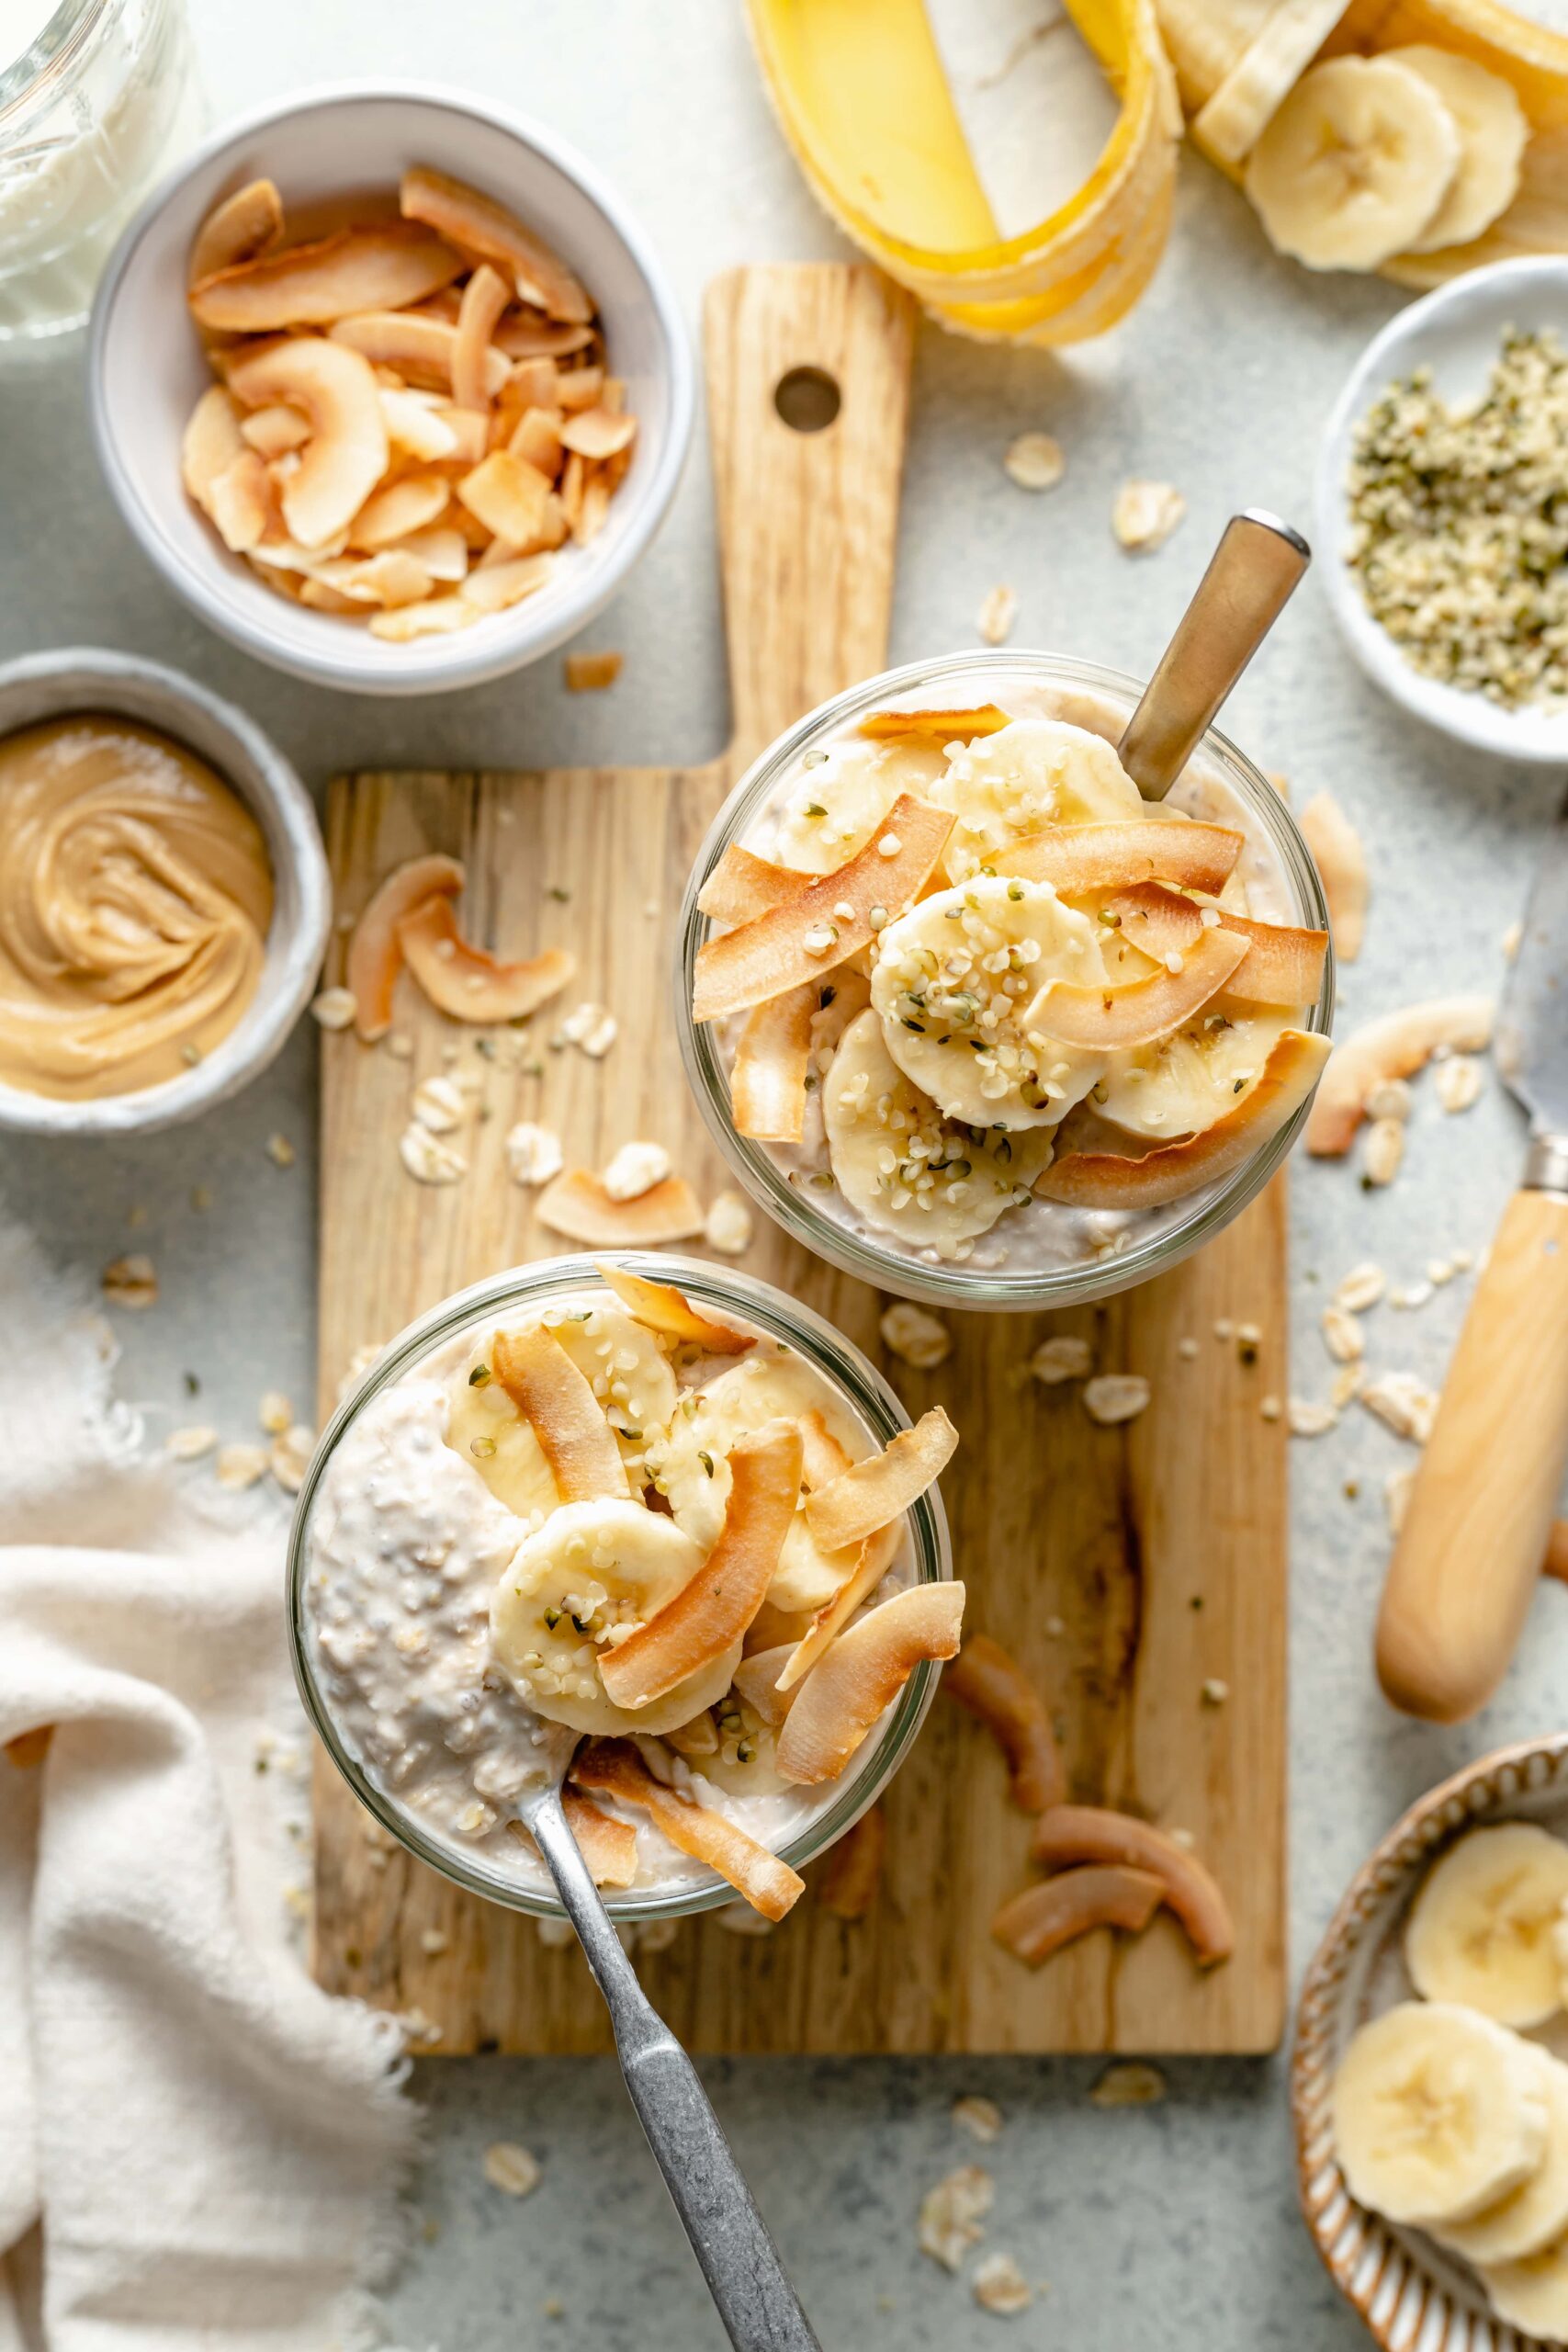 https://allthehealthythings.com/wp-content/uploads/2022/03/Coconut-Banana-Overnight-Oats-6-scaled.jpg